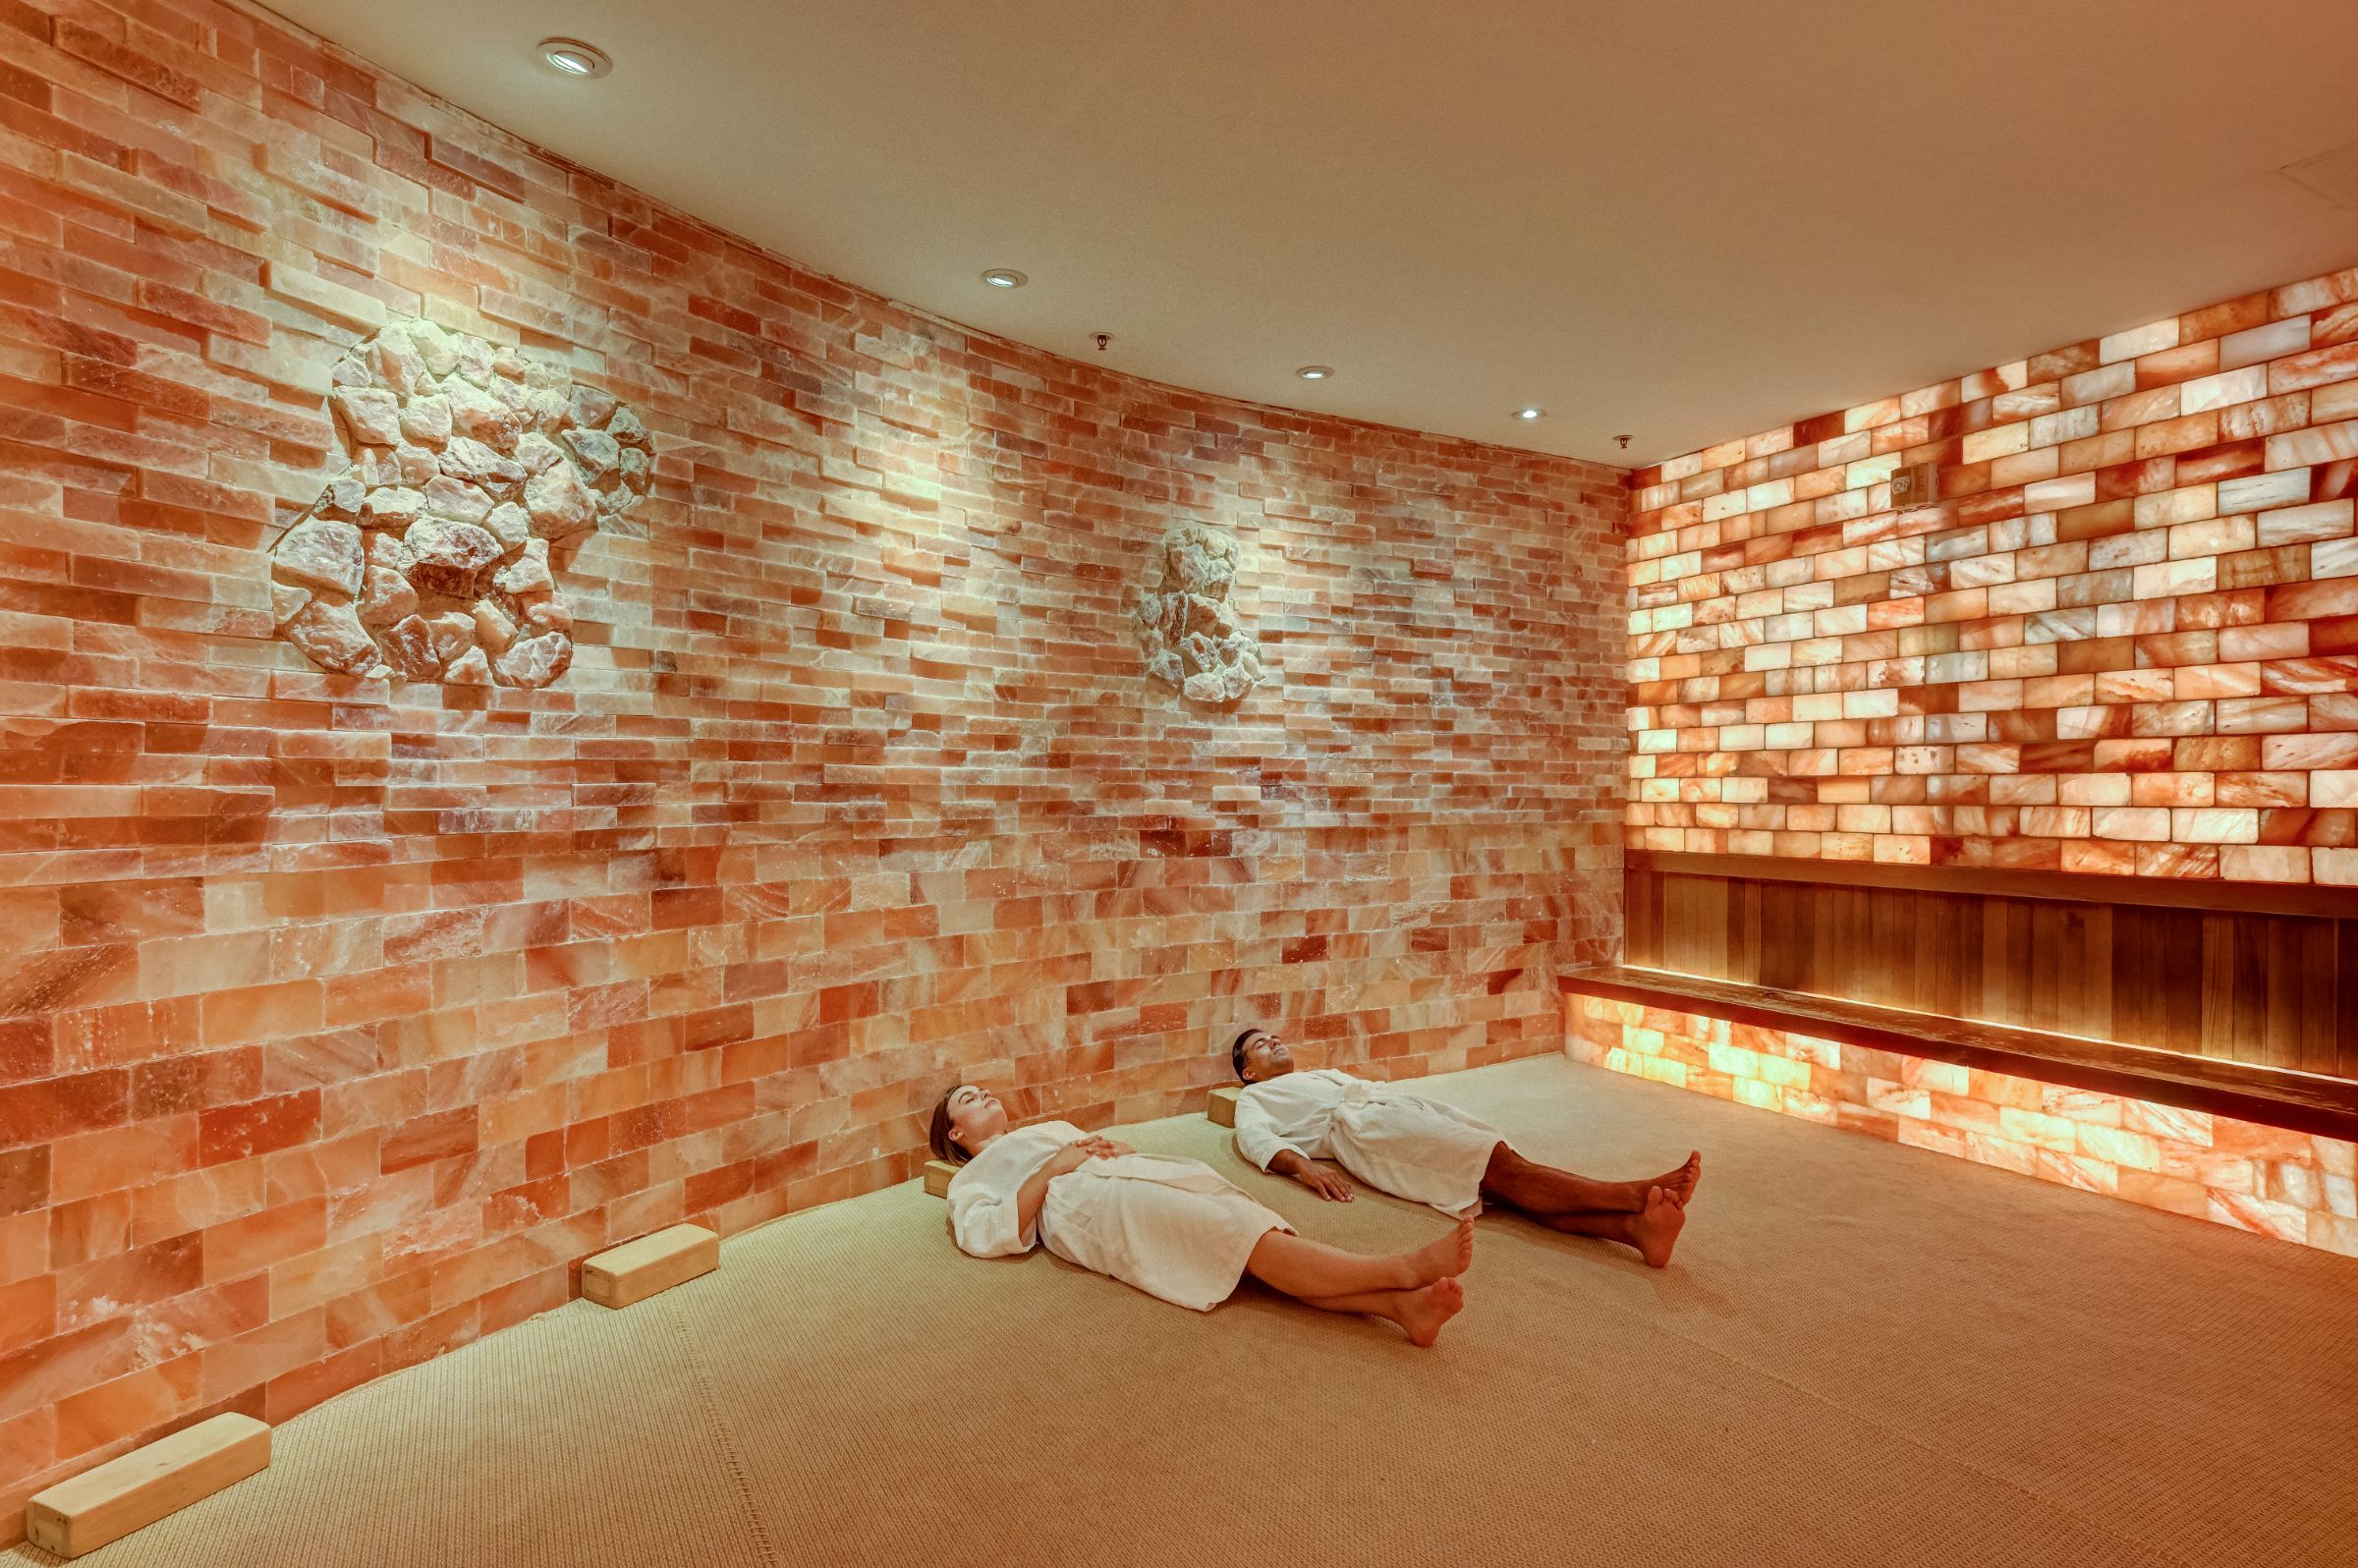 Two people lying on the ground of the Himalayan salt sauna at SoJo Spa Club, wearing robes, eyes closed, and relaxing